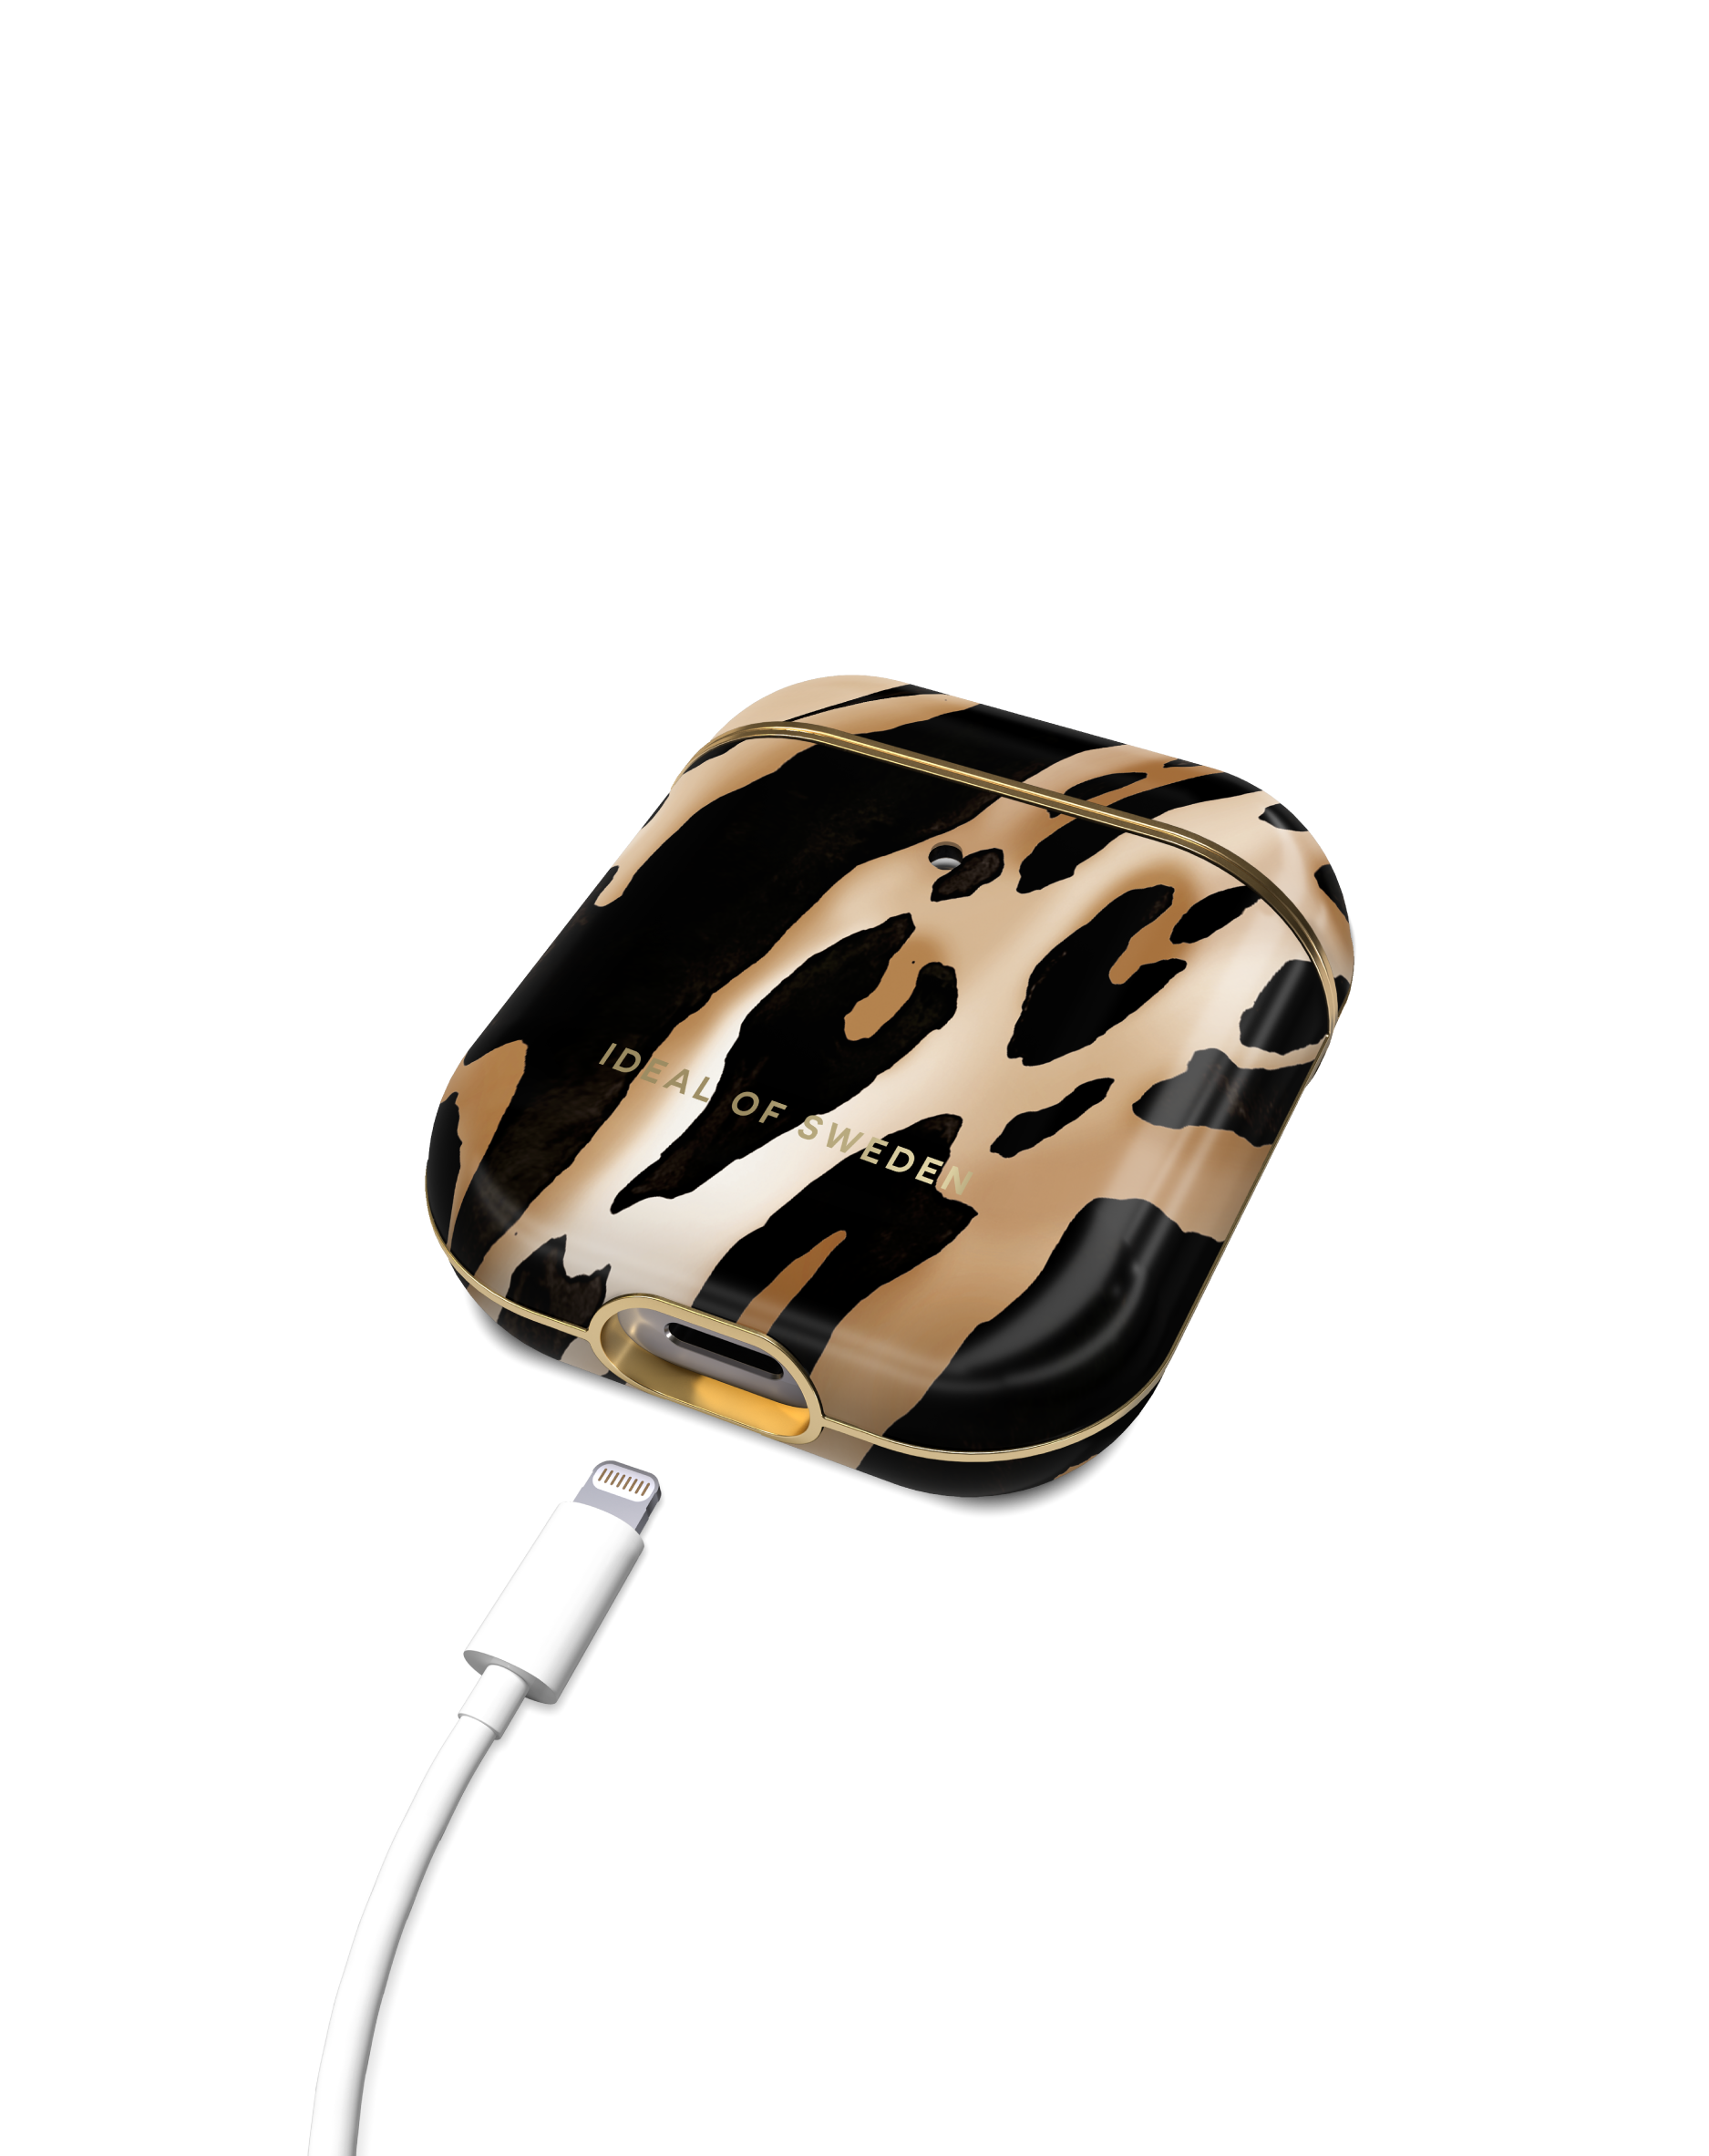 IDEAL OF Full Leopard passend für: IDFAPCAW21-356 SWEDEN Cover Apple Case AirPod Iconic